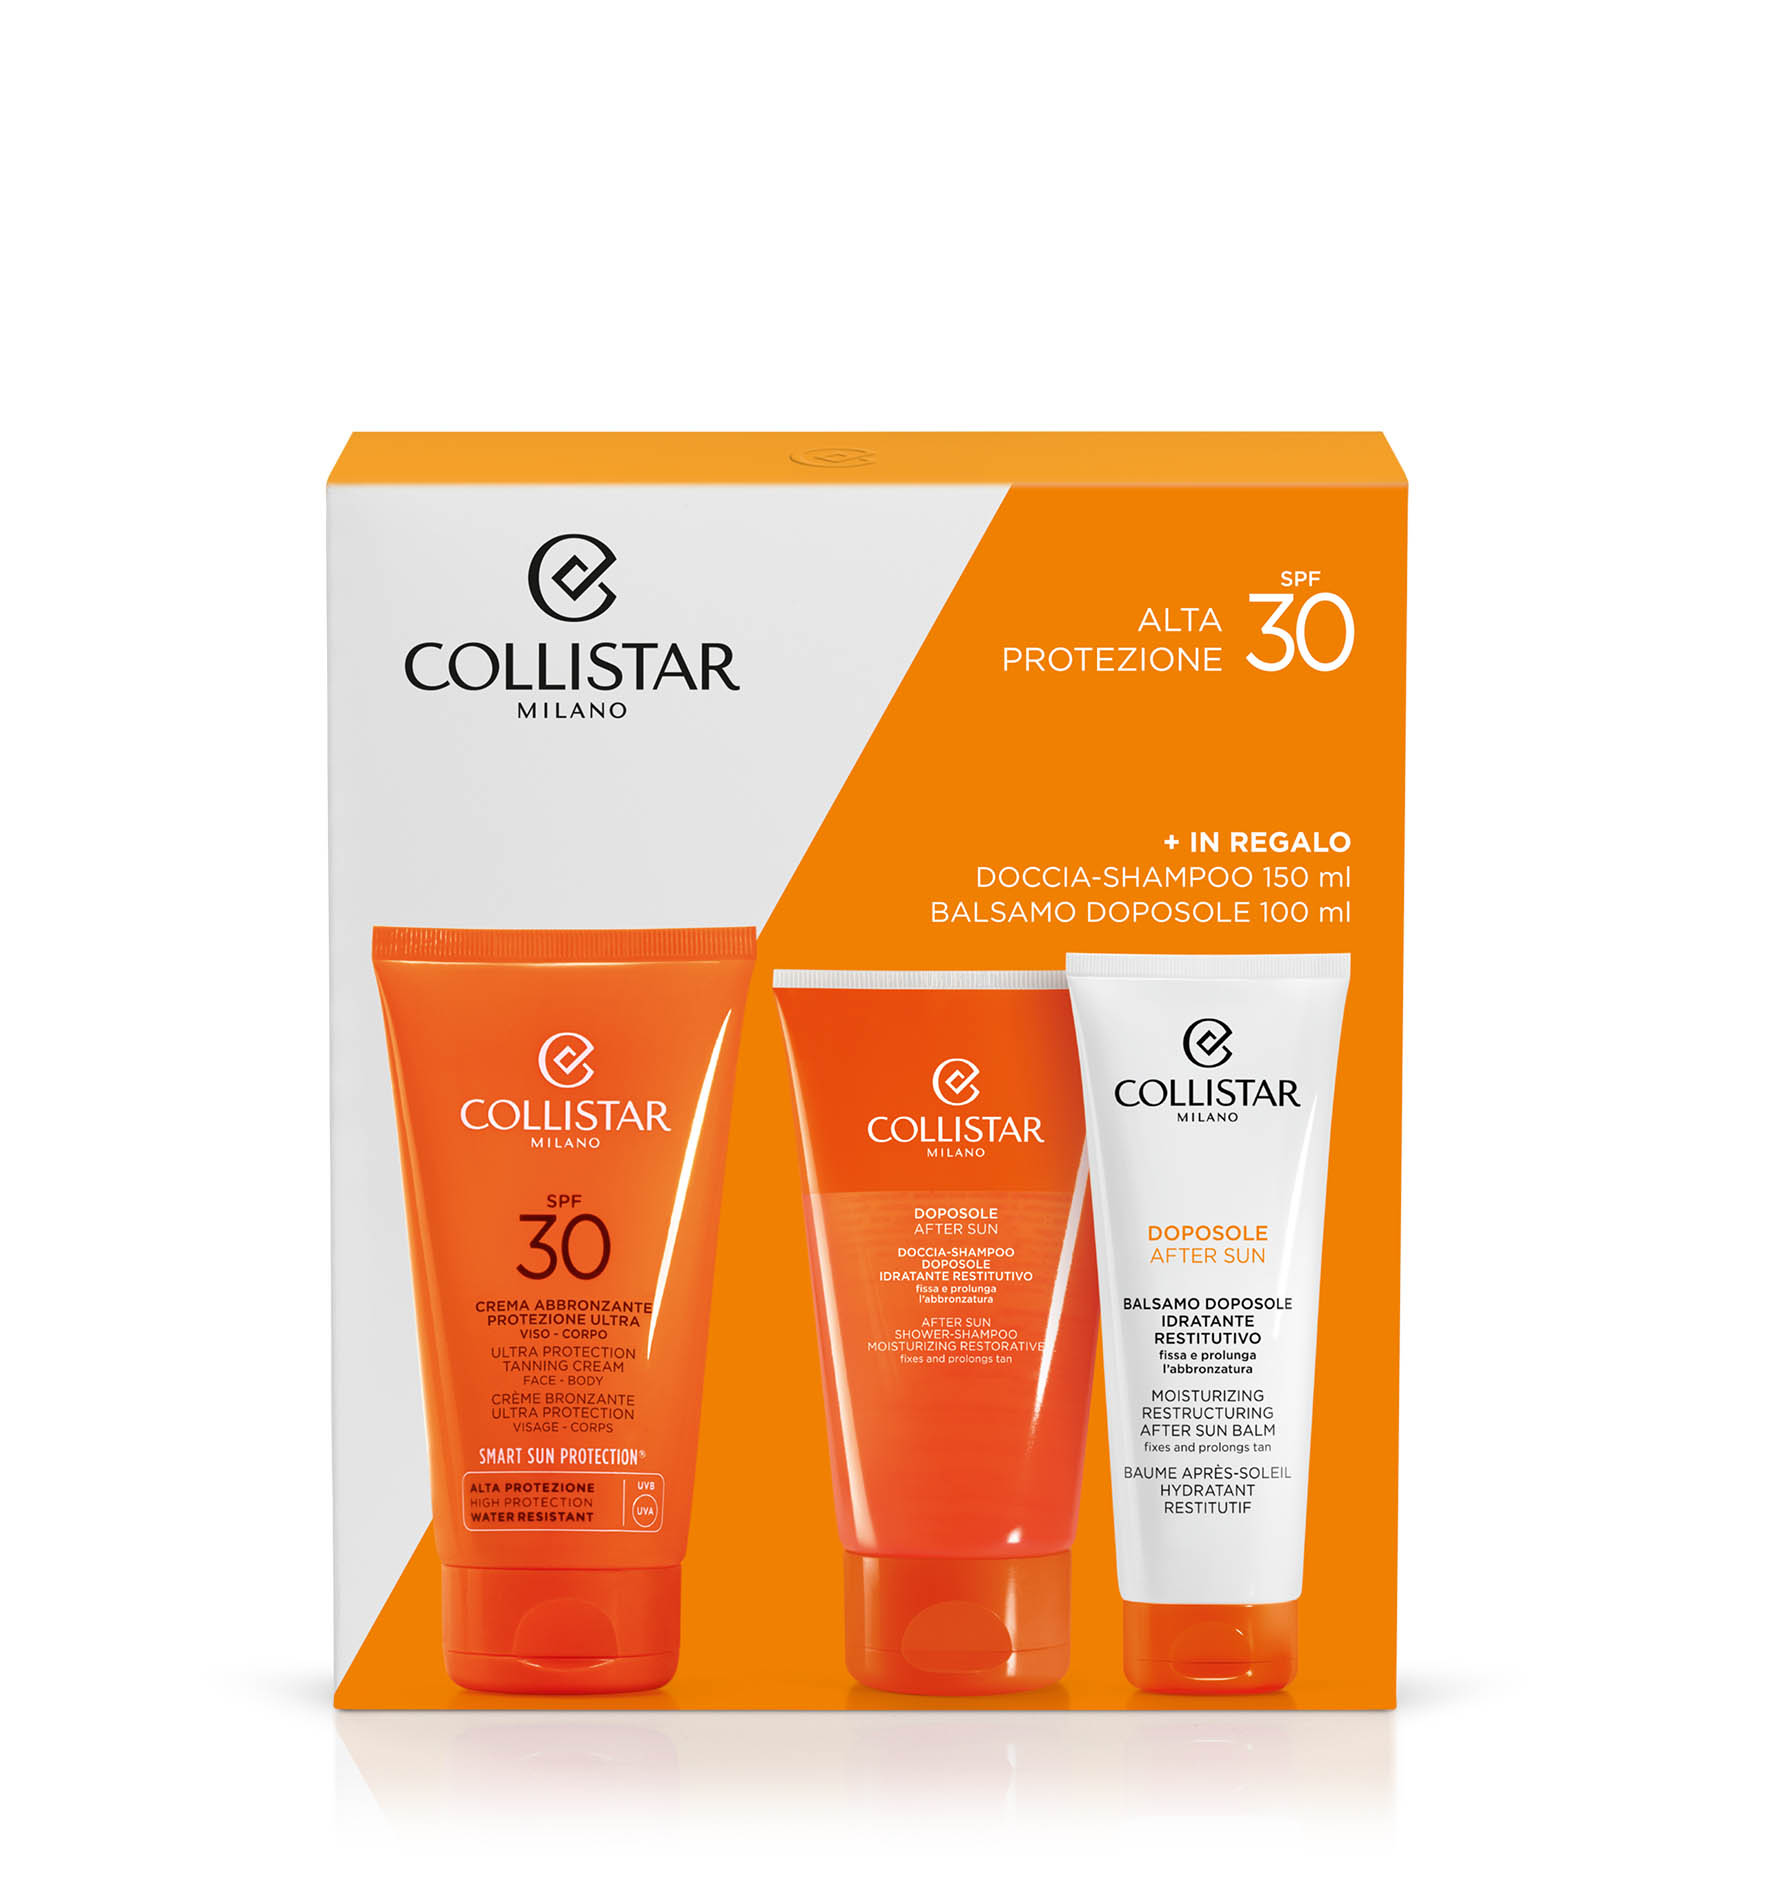 SET ULTRA PROTECTION TANNING CREAM FACE-BODY SPF 30 - Aftersun | Collistar - Shop Online Ufficiale